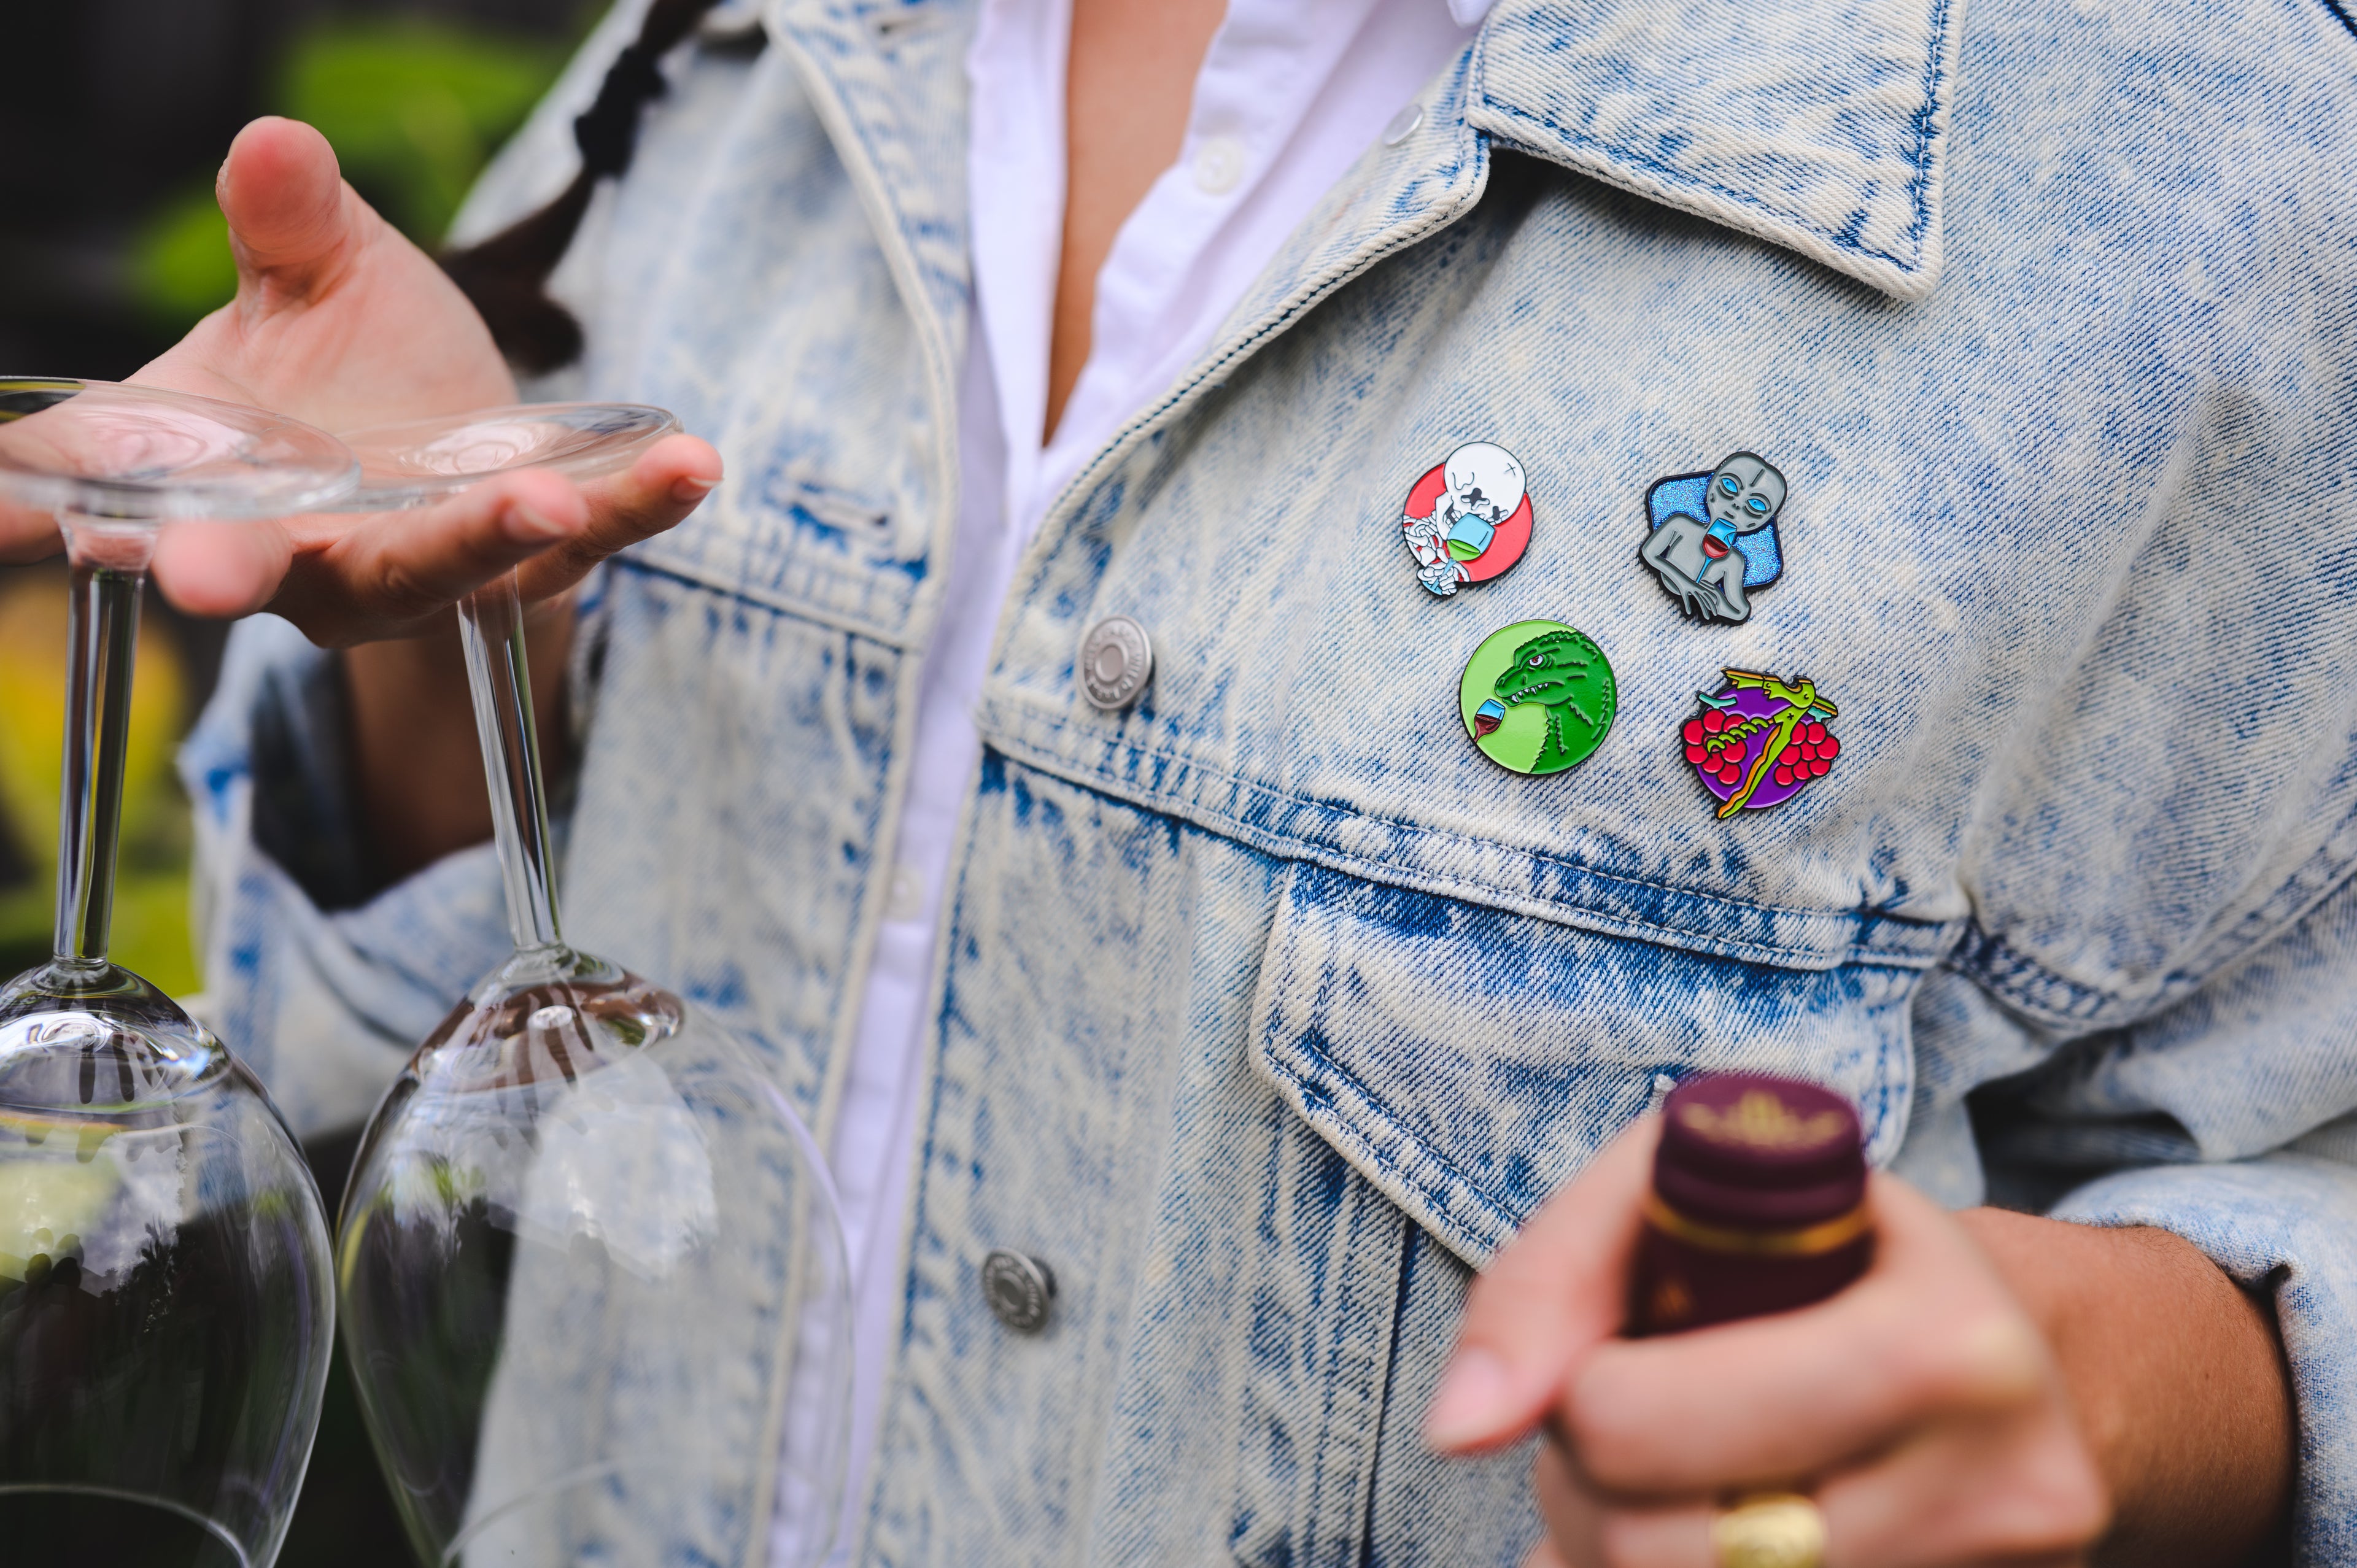 A person wearing a jean jacket with four shitty wine memes wine enamel pins on.  Winezilla, wine skull pin, alien wine pin, and a corkscrew pin. There are also holding two wine glasses and a wine bottle.